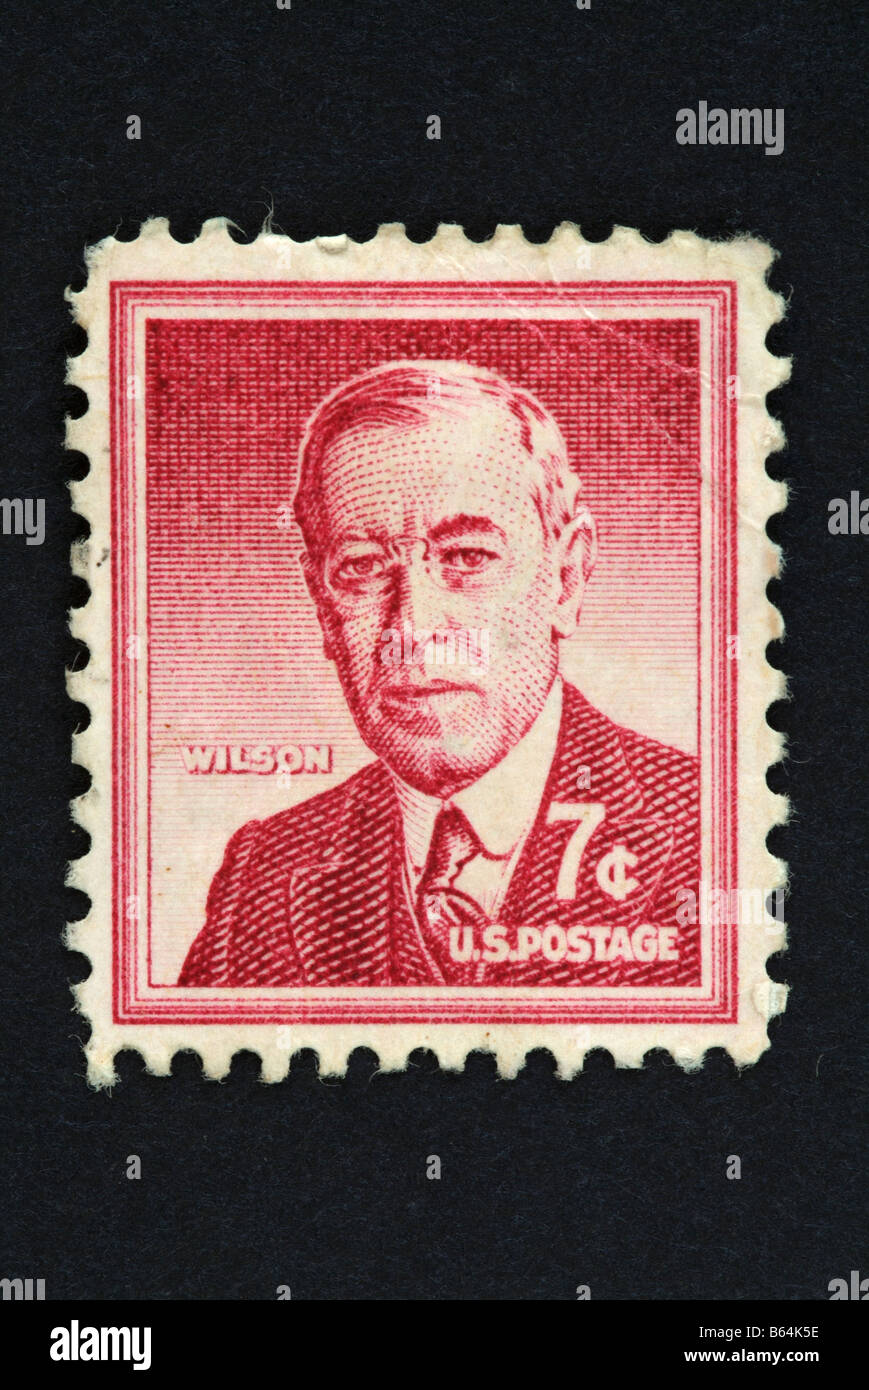 A seven cents US postage stamp with the image of Woodrow Wilson. Stock Photo